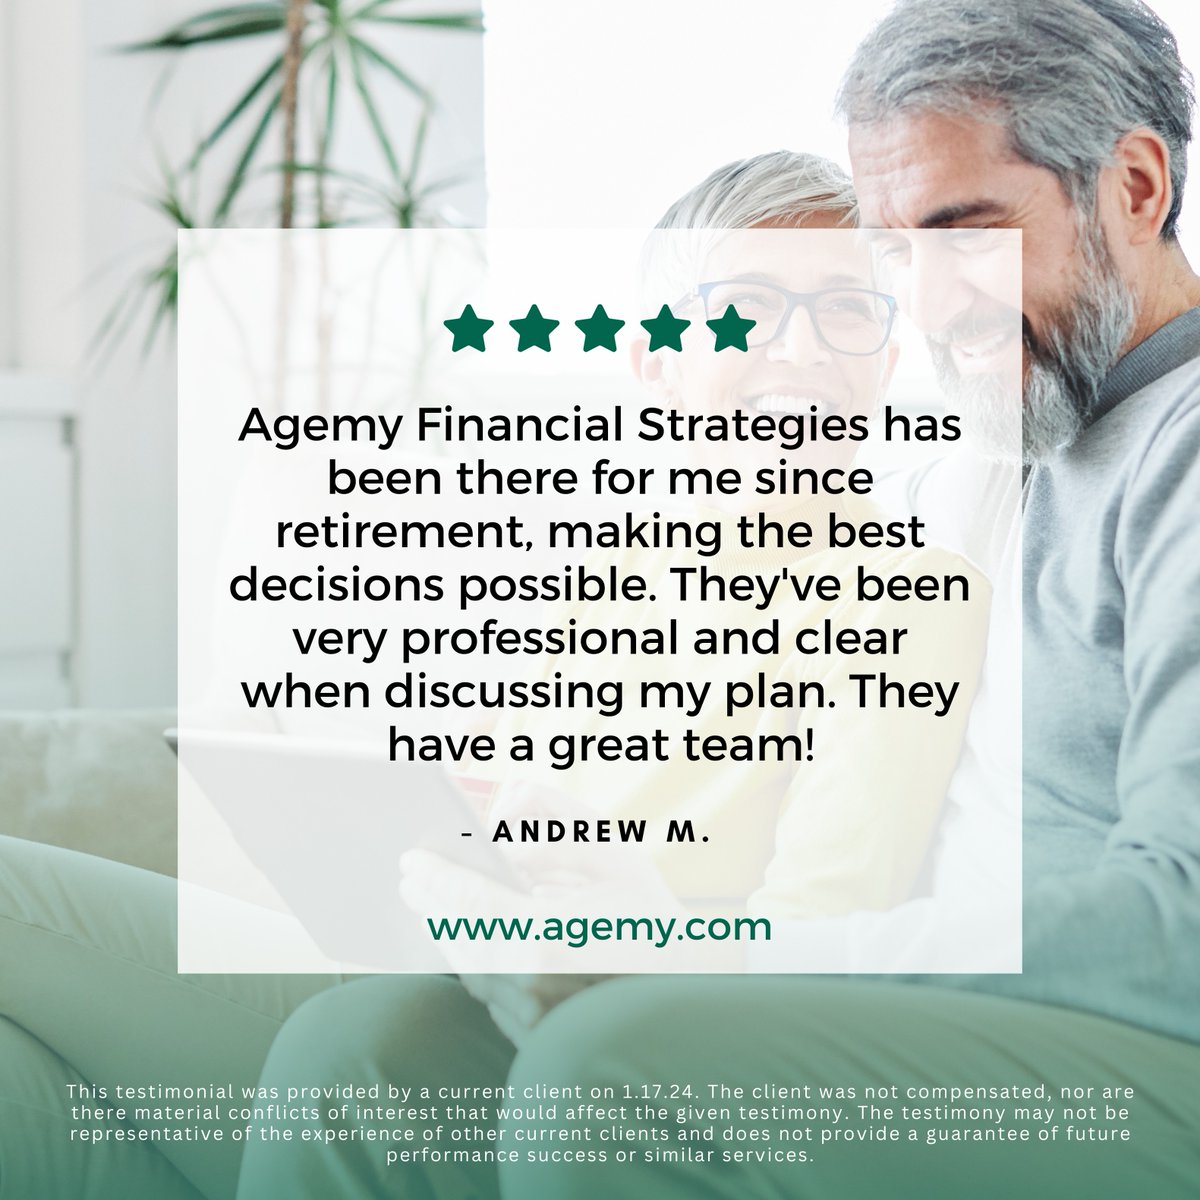 When it comes to preparing for #retirement, having a #financialadvisor you can trust is vital. At #AgemyFinancialStrategies, our mission is to make transitioning to #retirement a seamless process.

Learn how we can help you plan a #worryfreeretirement at agemy.com.